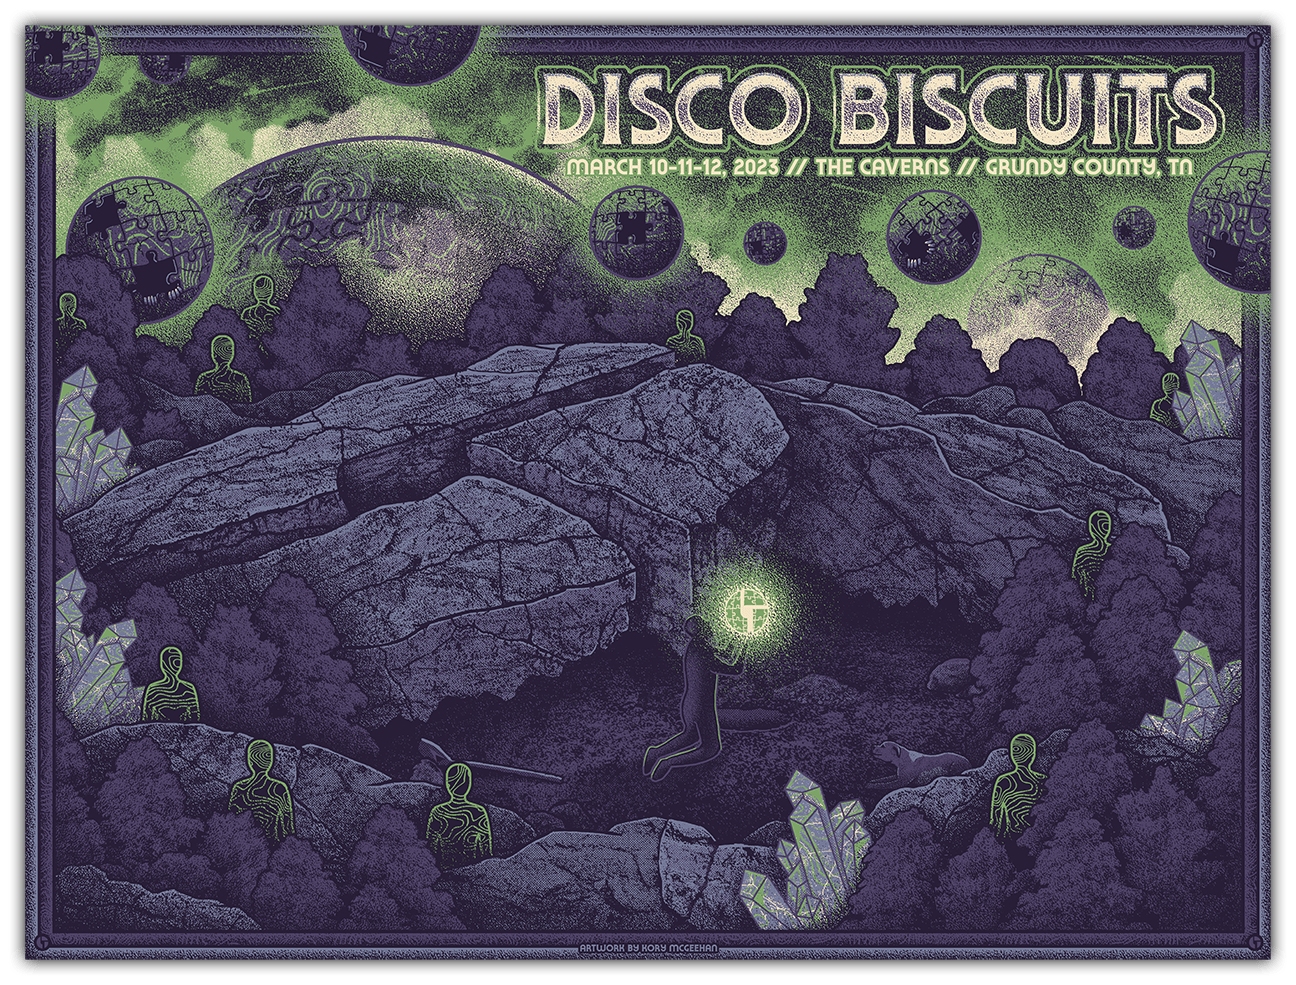 Disco Biscuits - Caverns 2023 - Event Poster - Paper